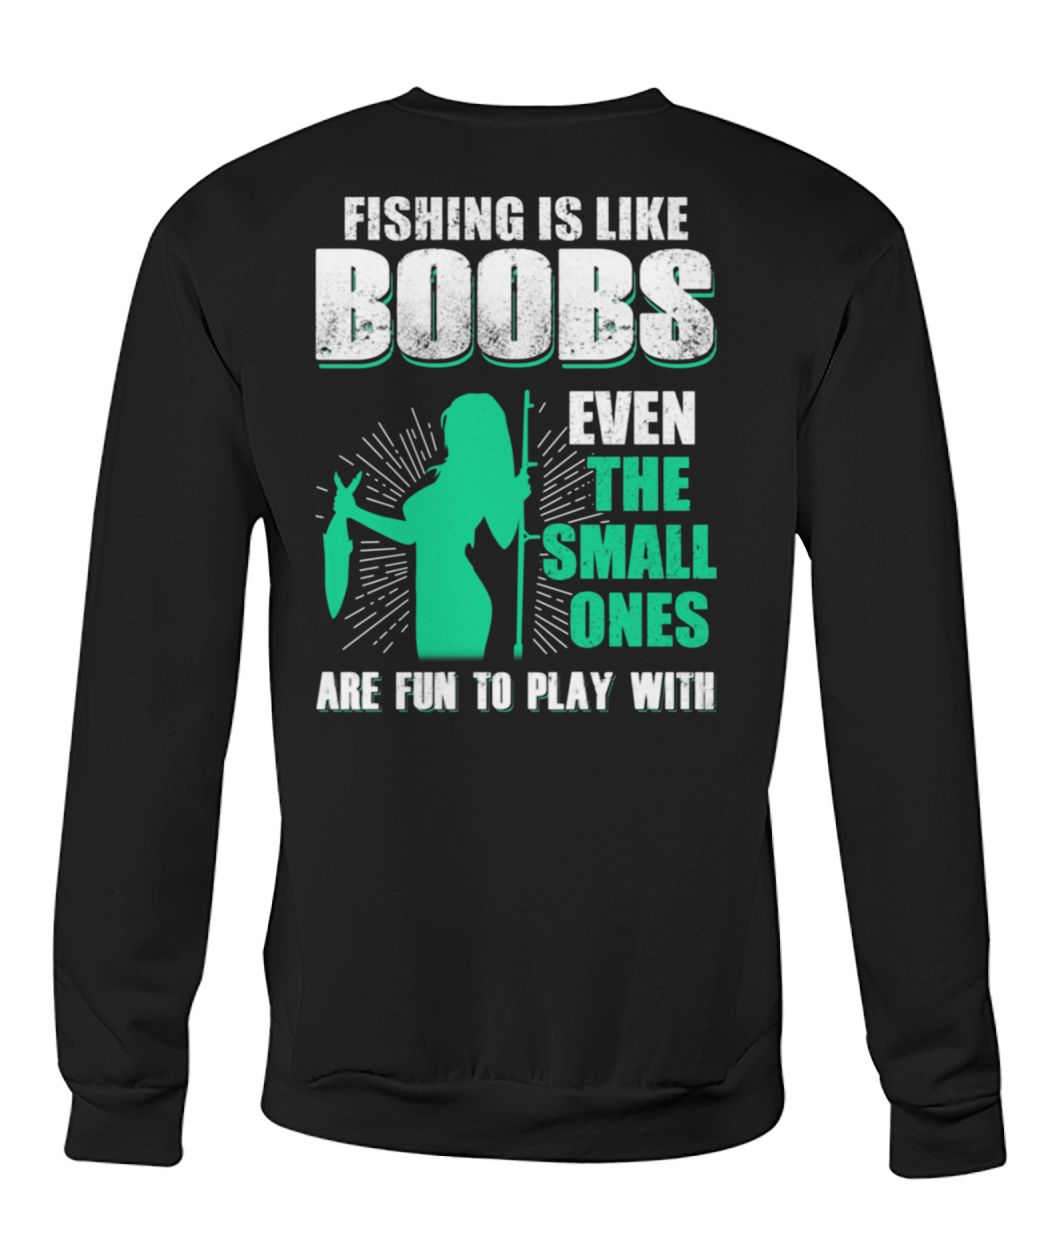 Fishing is like boobs even the small ones are fun to play with crew neck sweatshirt